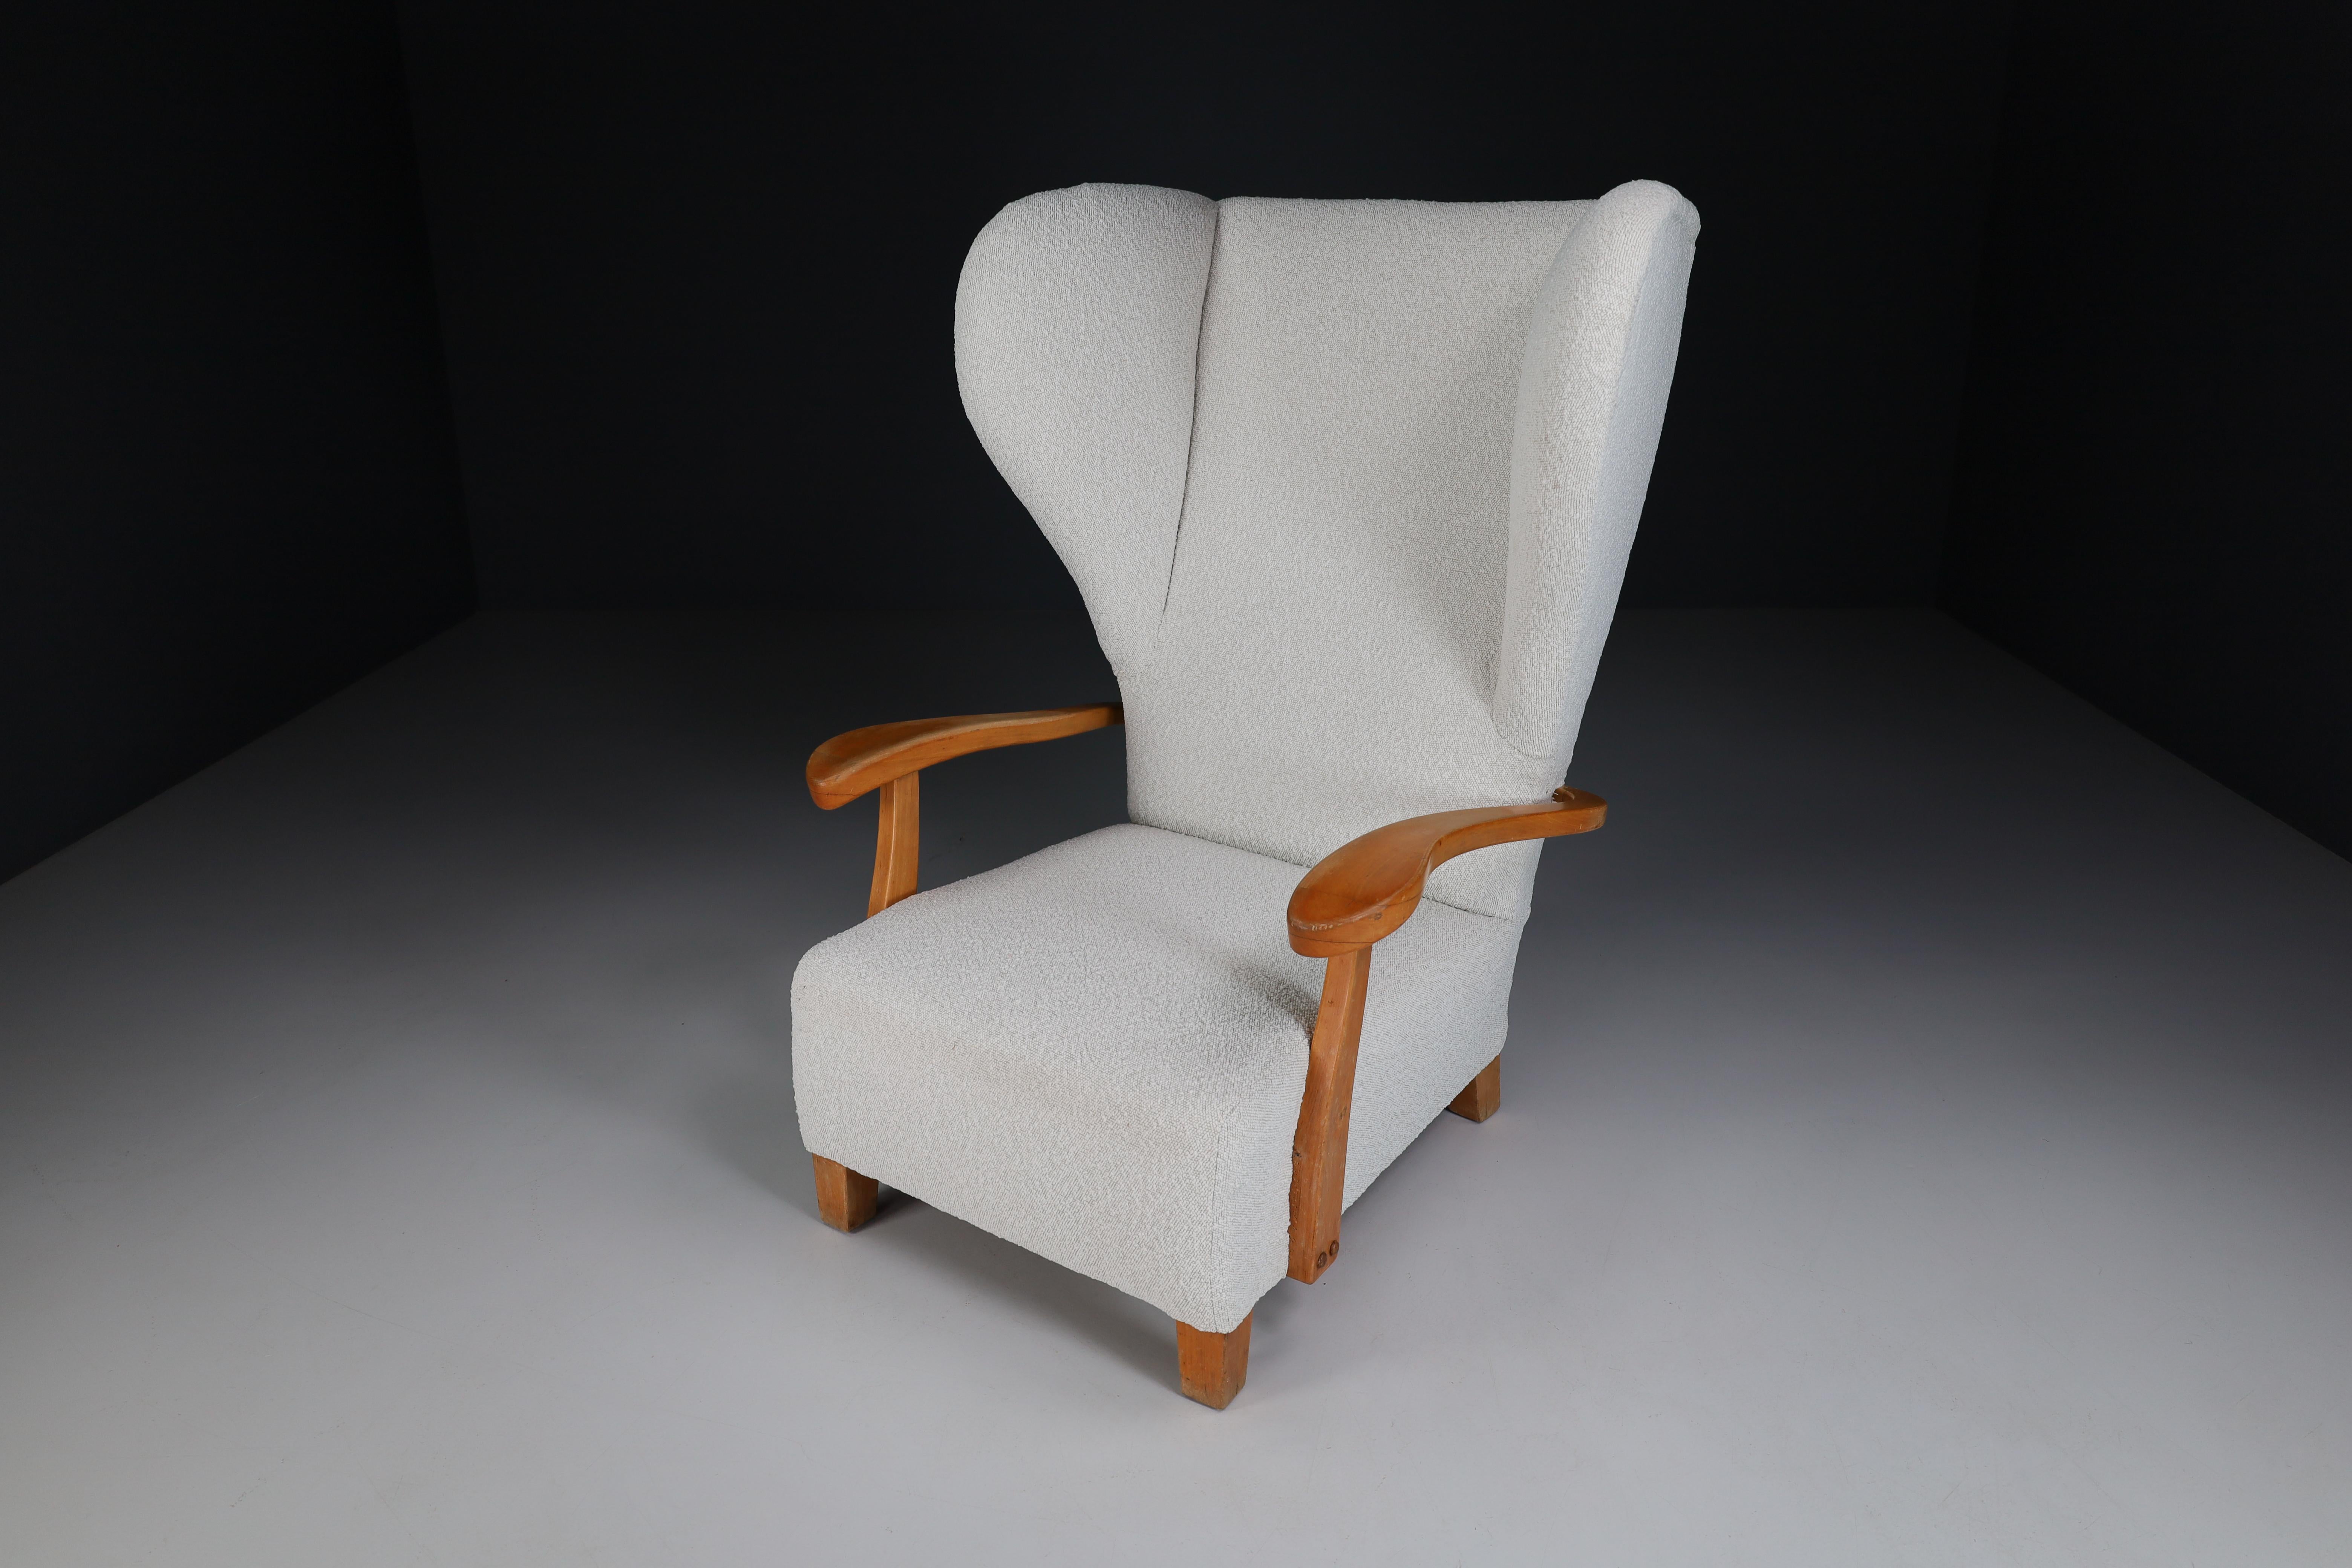 20th Century XXL Monumental Wingback Armchair in Walnut and Bouclé Fabric, France 1930s For Sale